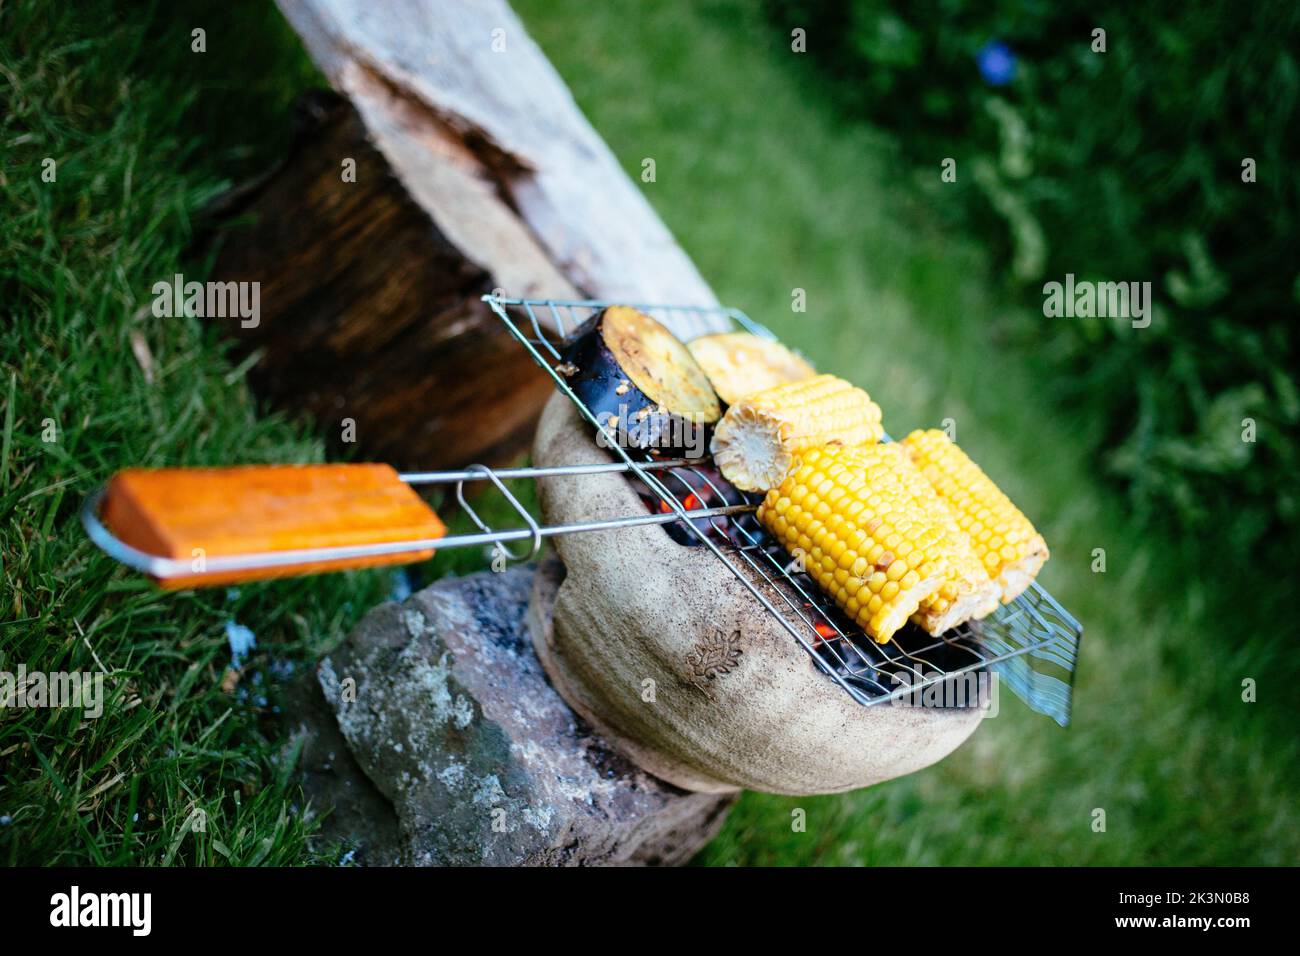 A close-up of cooking homemade barbecue with eggplant and corn cobs in park Stock Photo